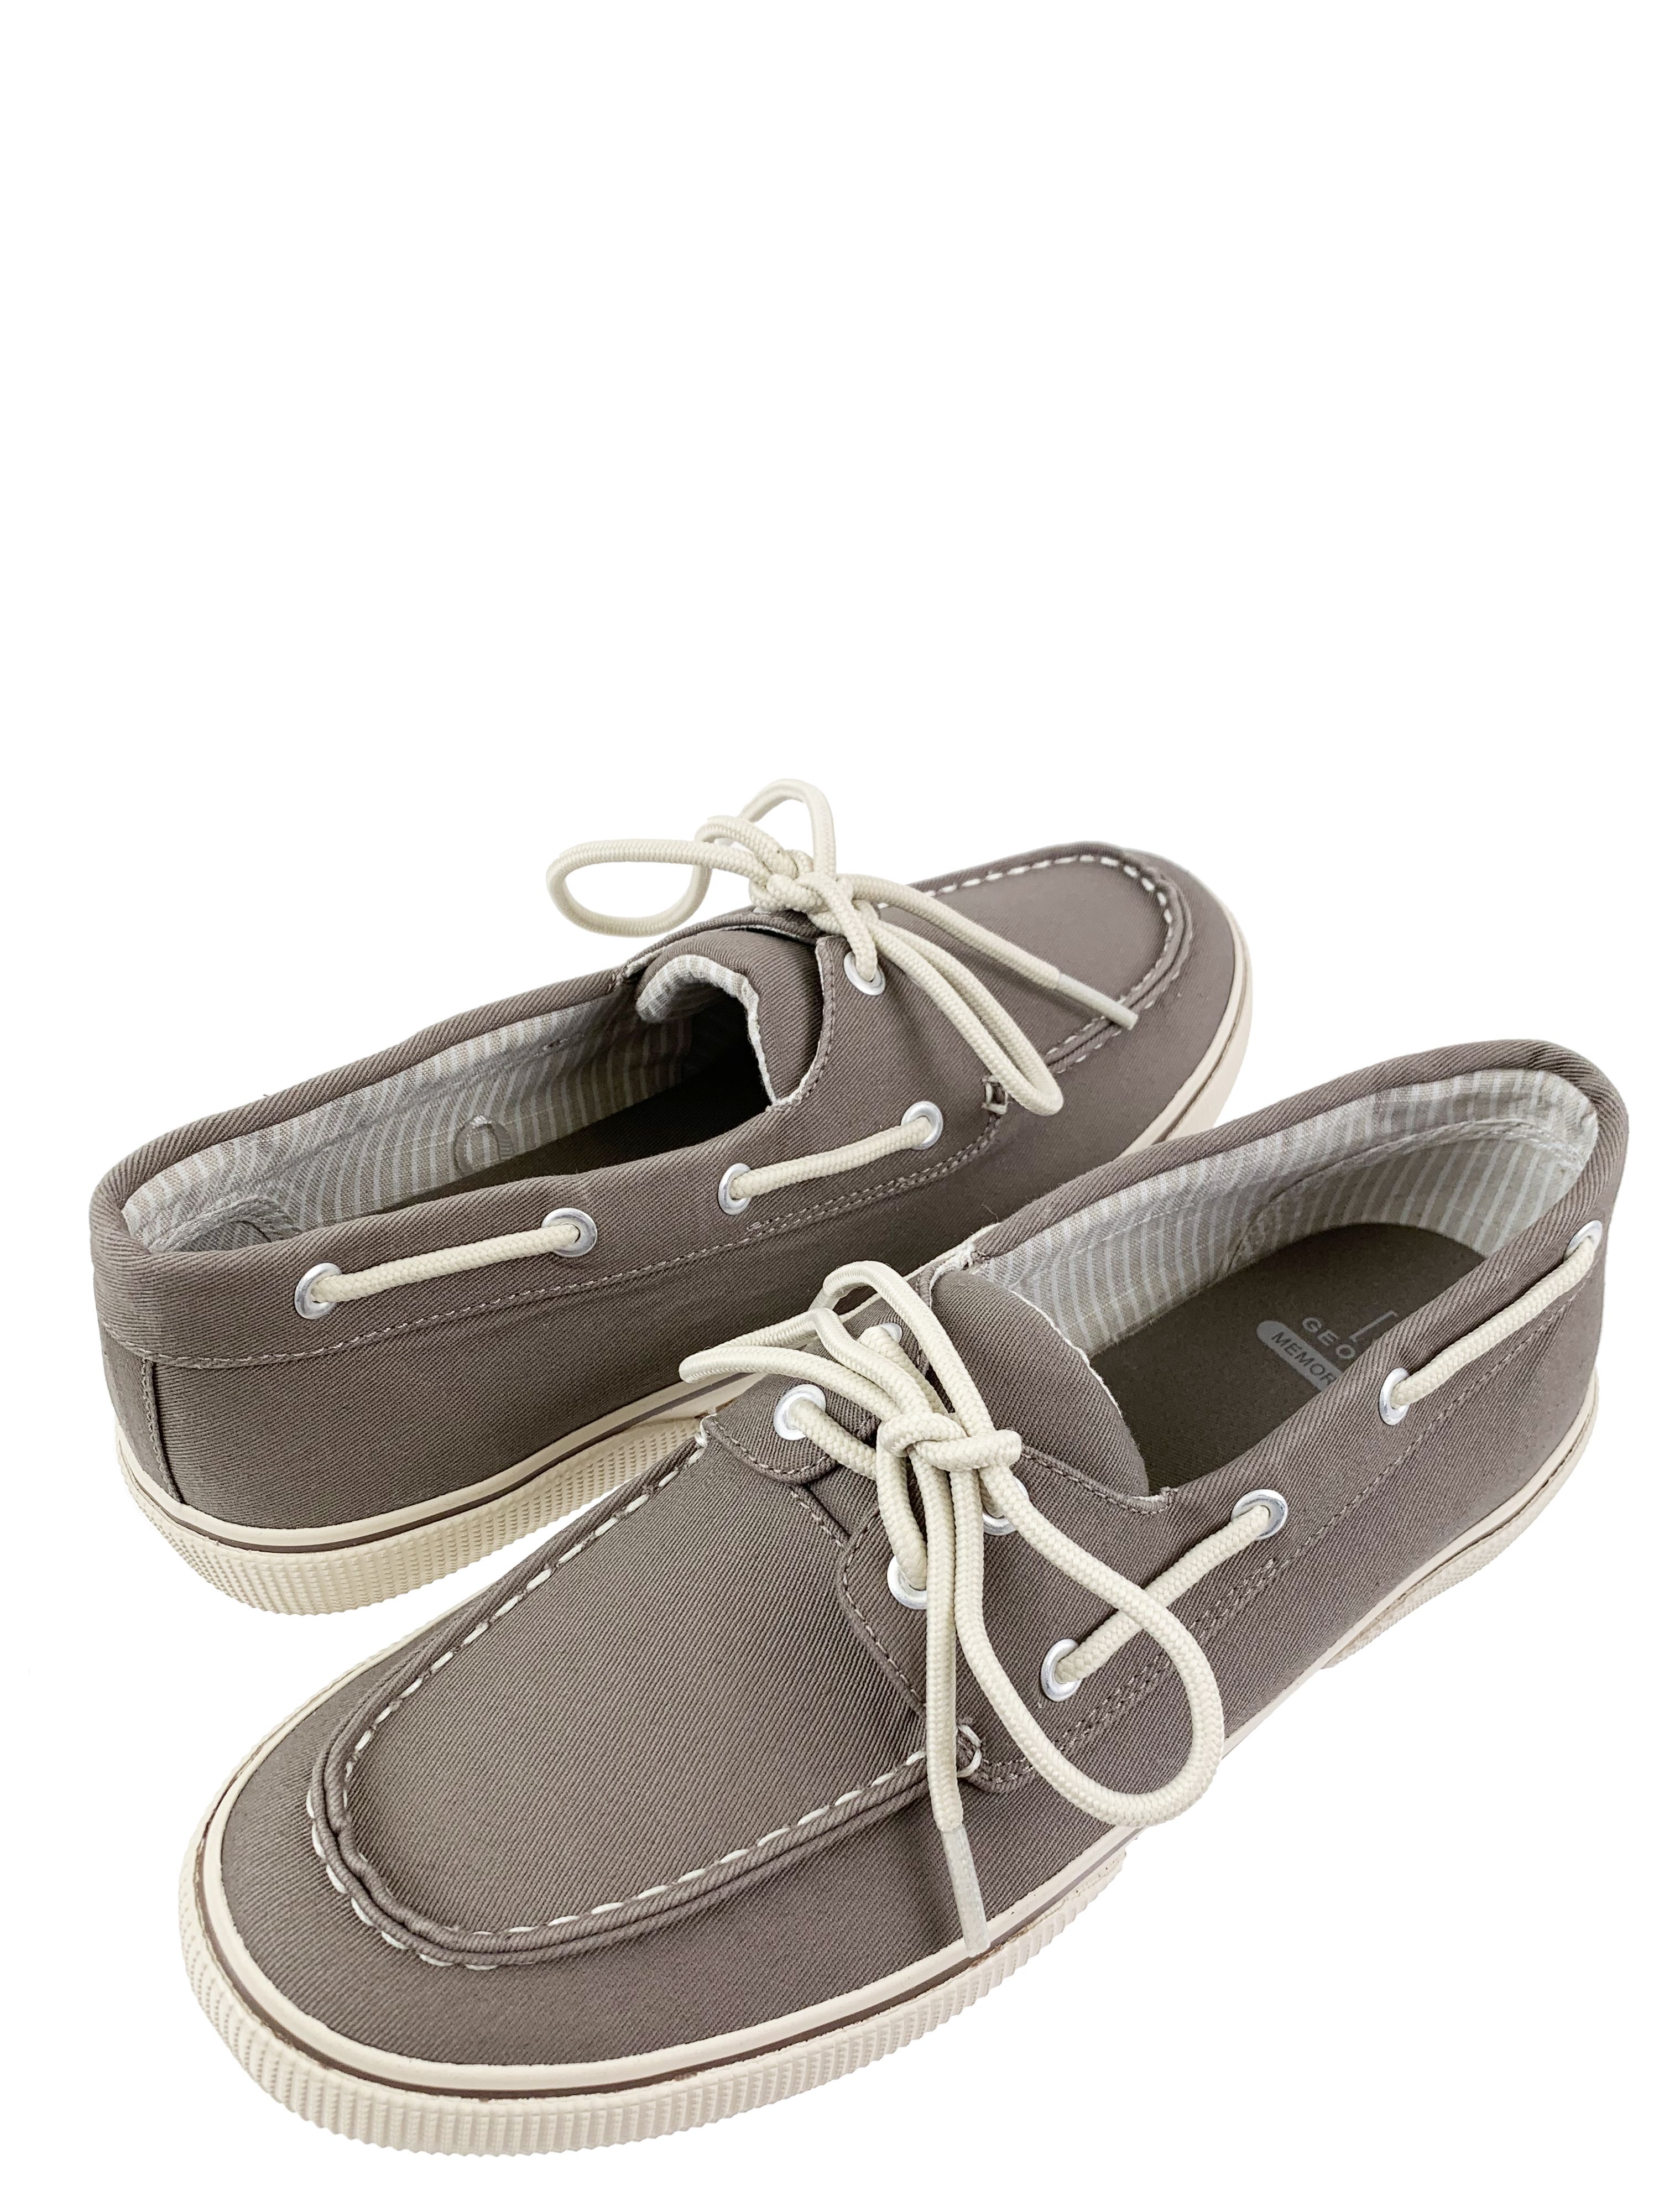 George Men's Classic Canvas Boat Shoe with Memory Foam - image 4 of 5